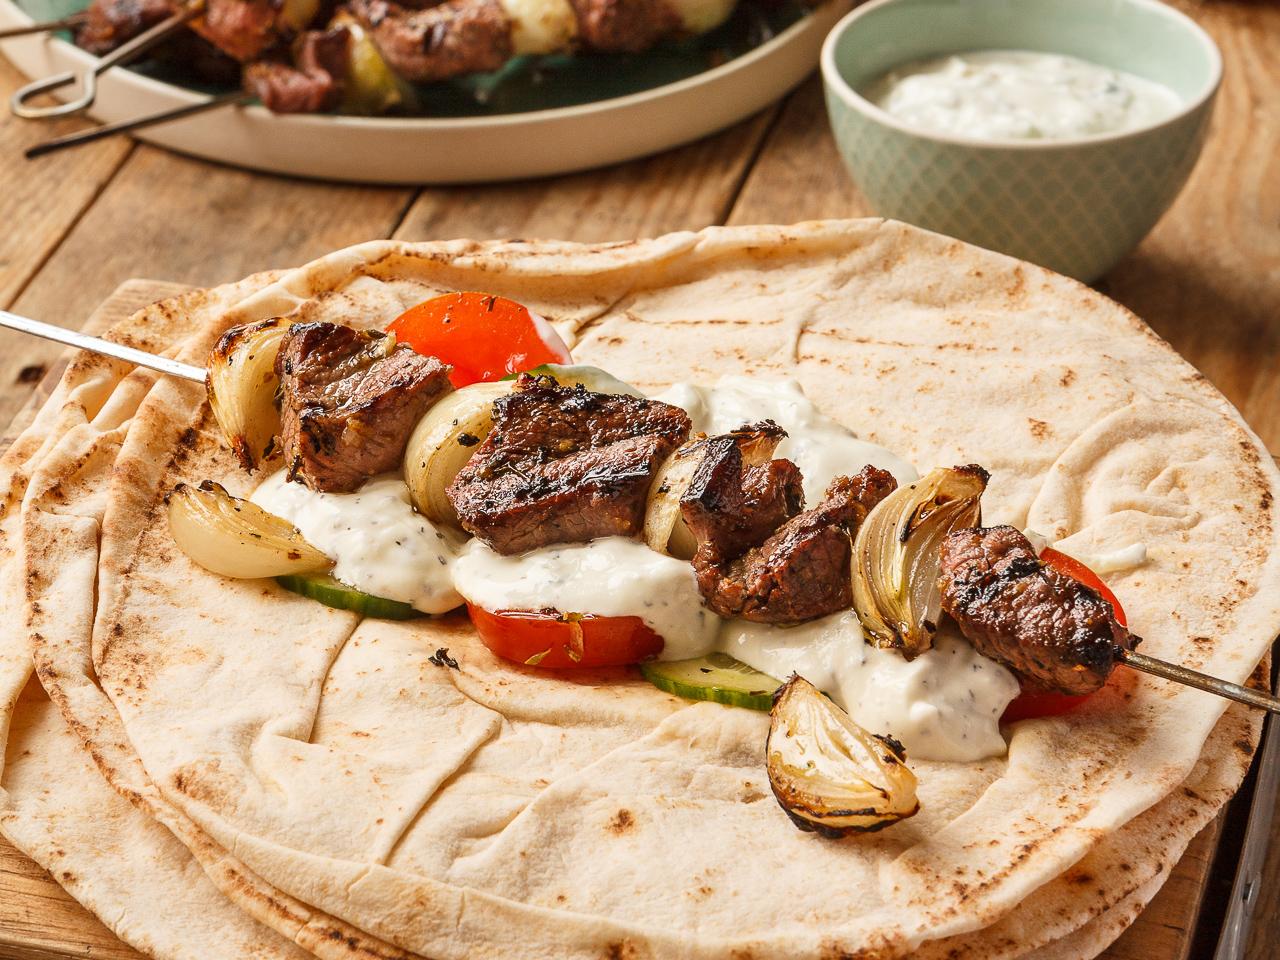 Toasted flatbreads are perfect for this speedy dish